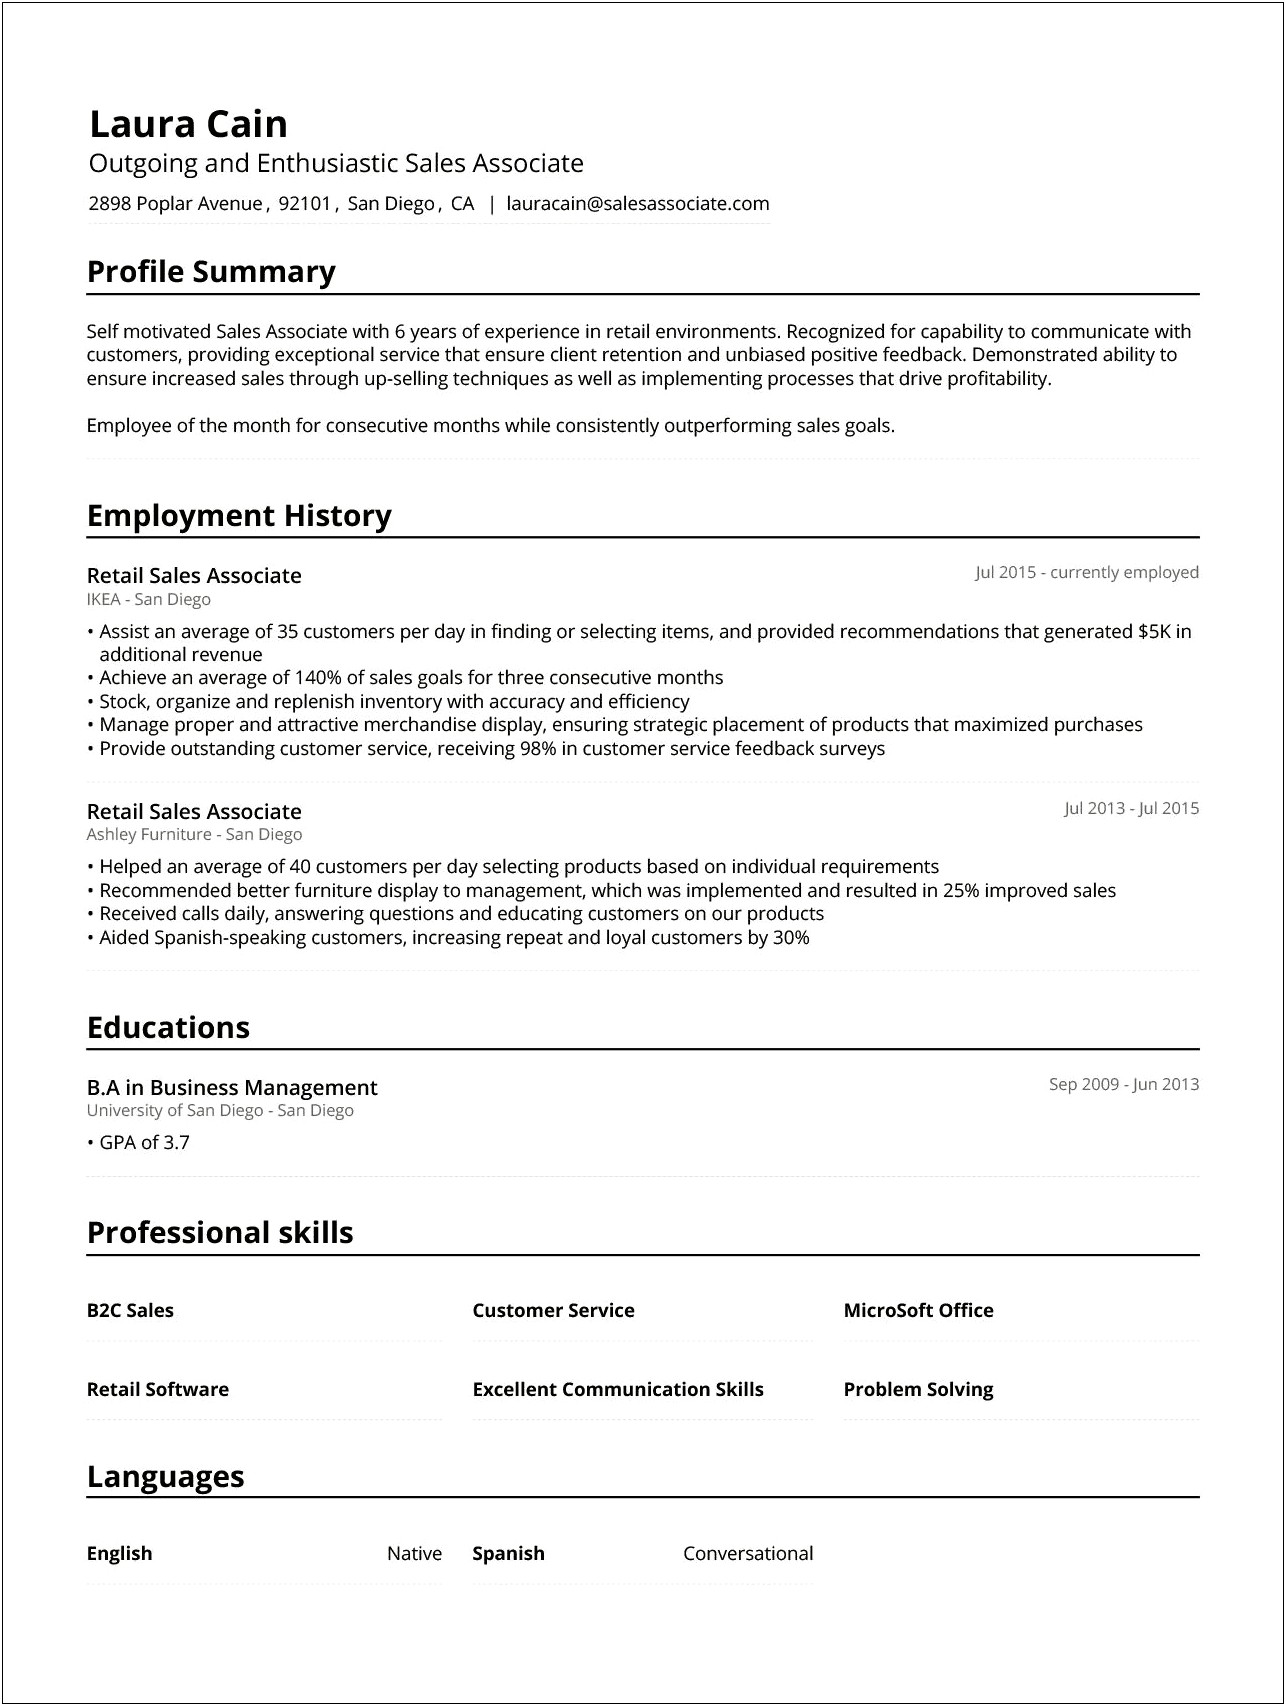 Tips For Writing Abou Retail Experience On Resume